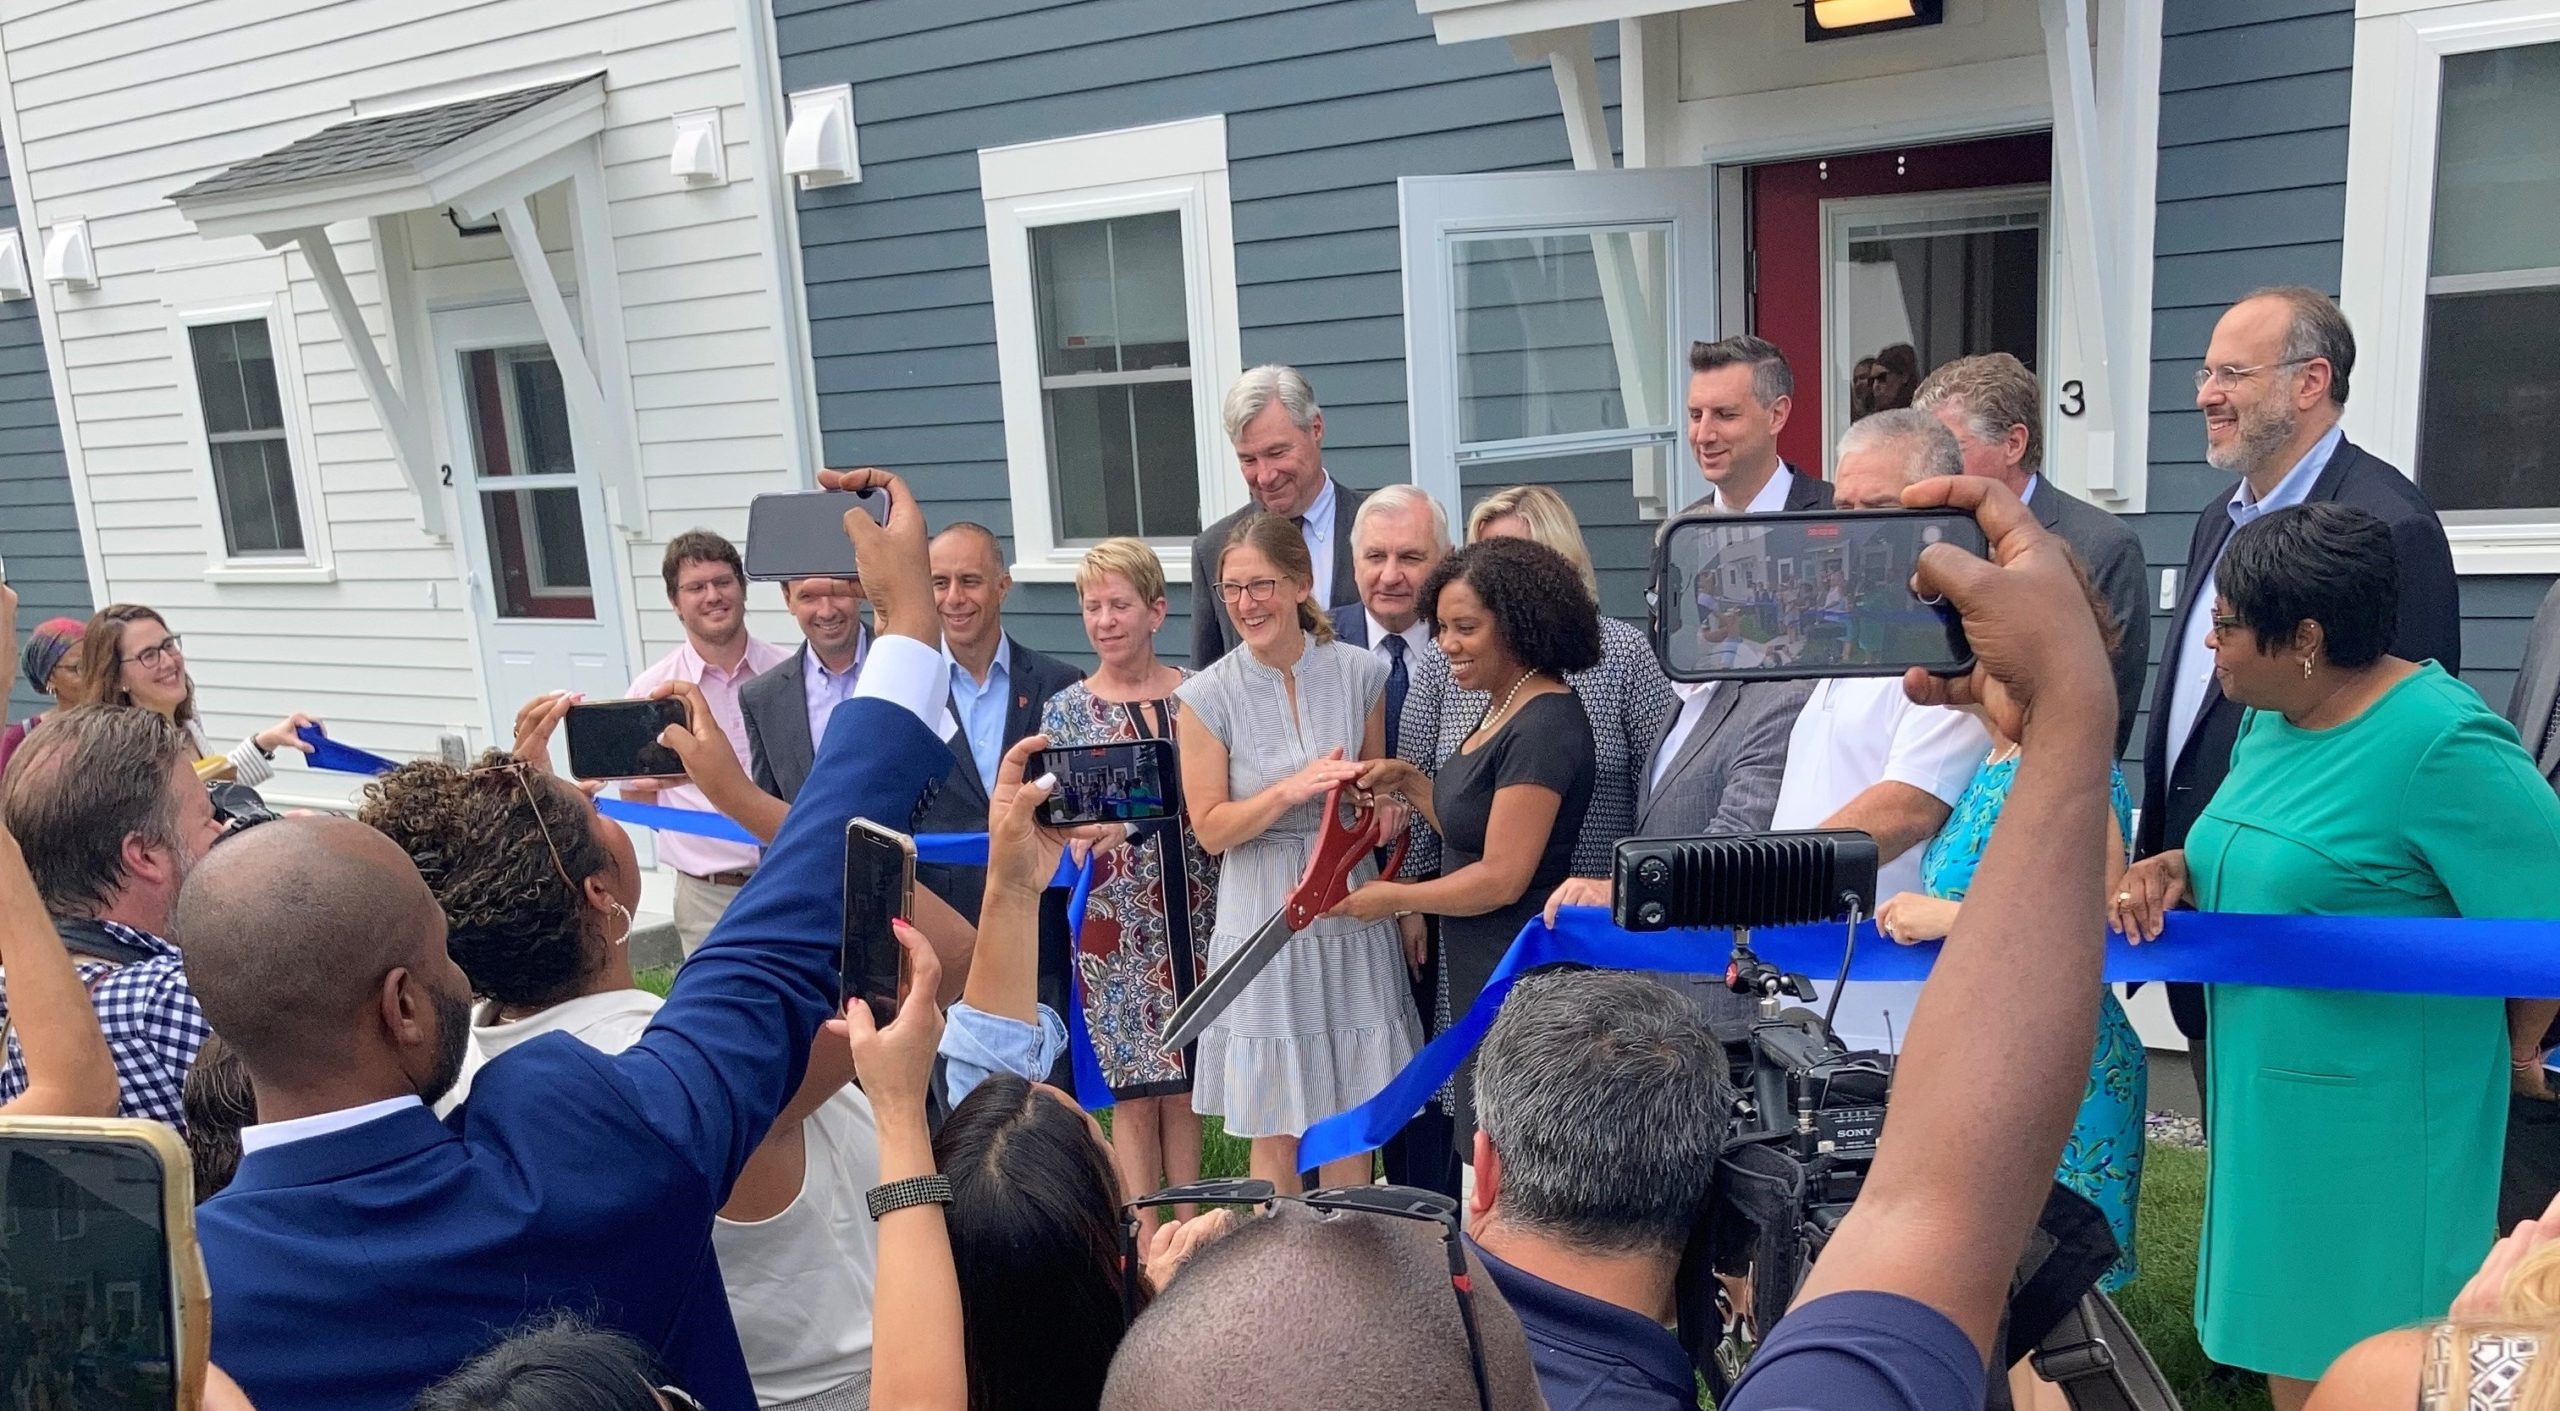 ONE Neighborhood Builders Celebrates Completion of Two New Housing Developments